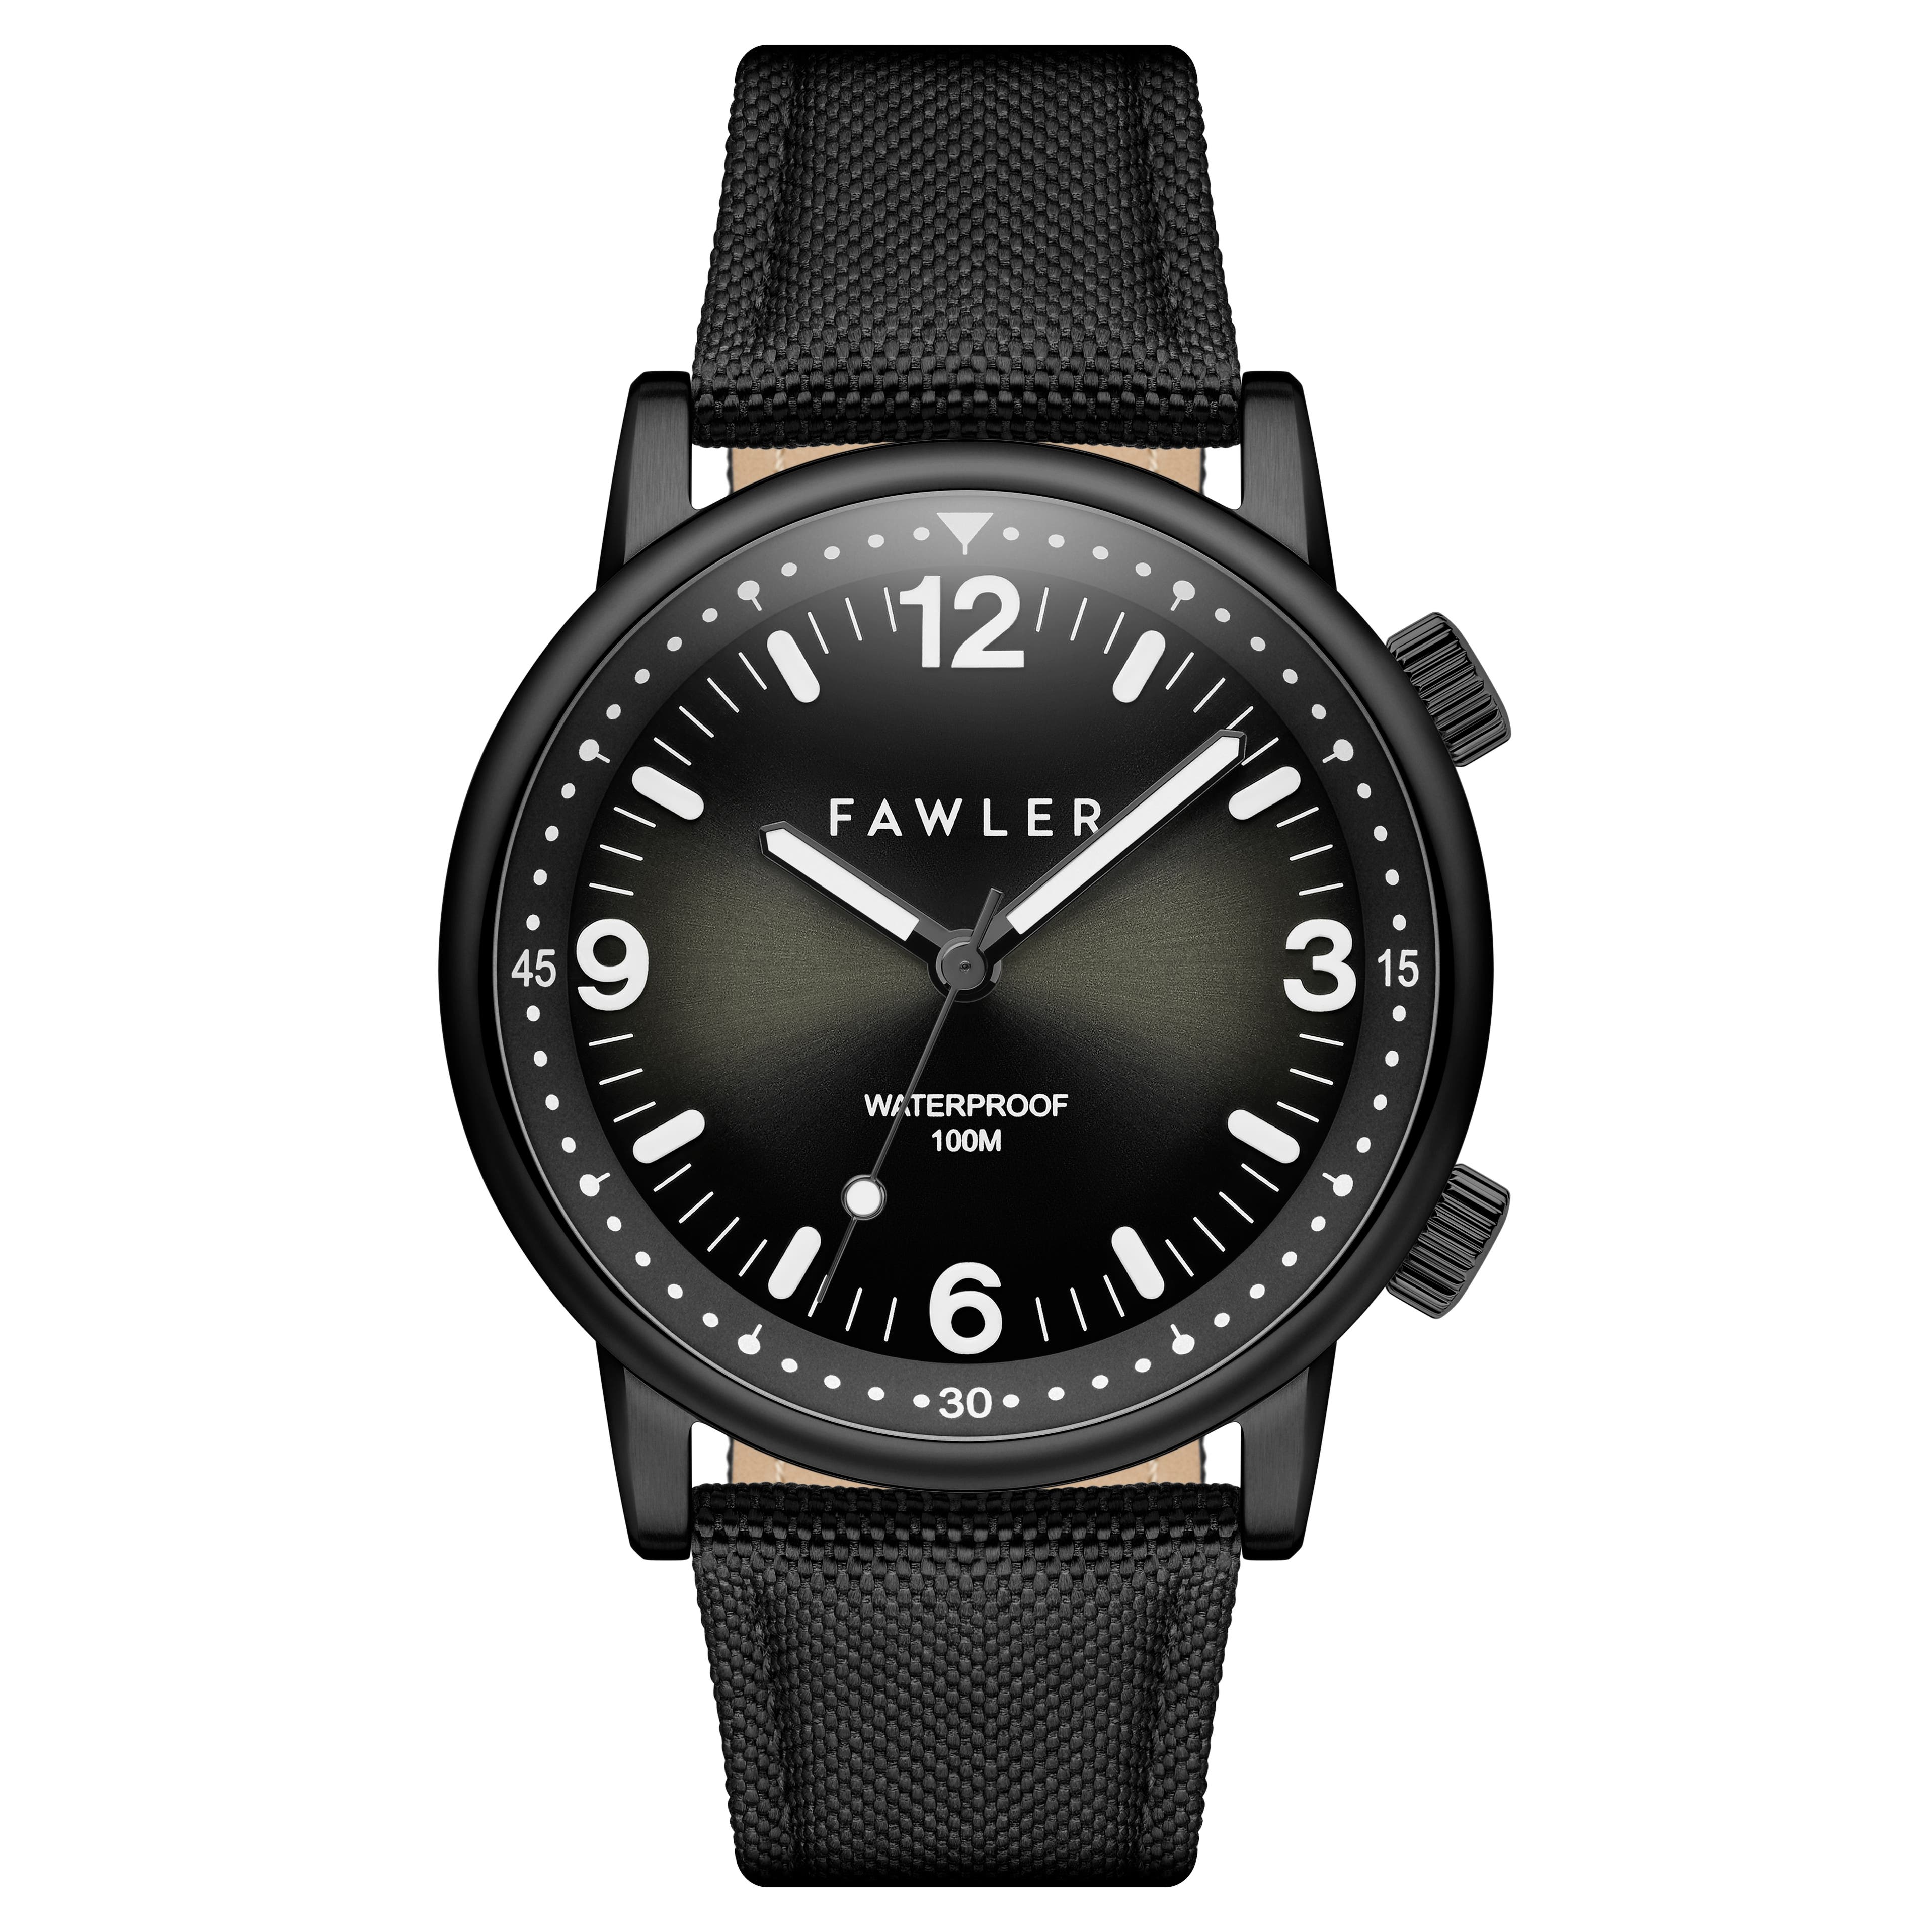 Acero | Black Stainless Steel Dive Watch